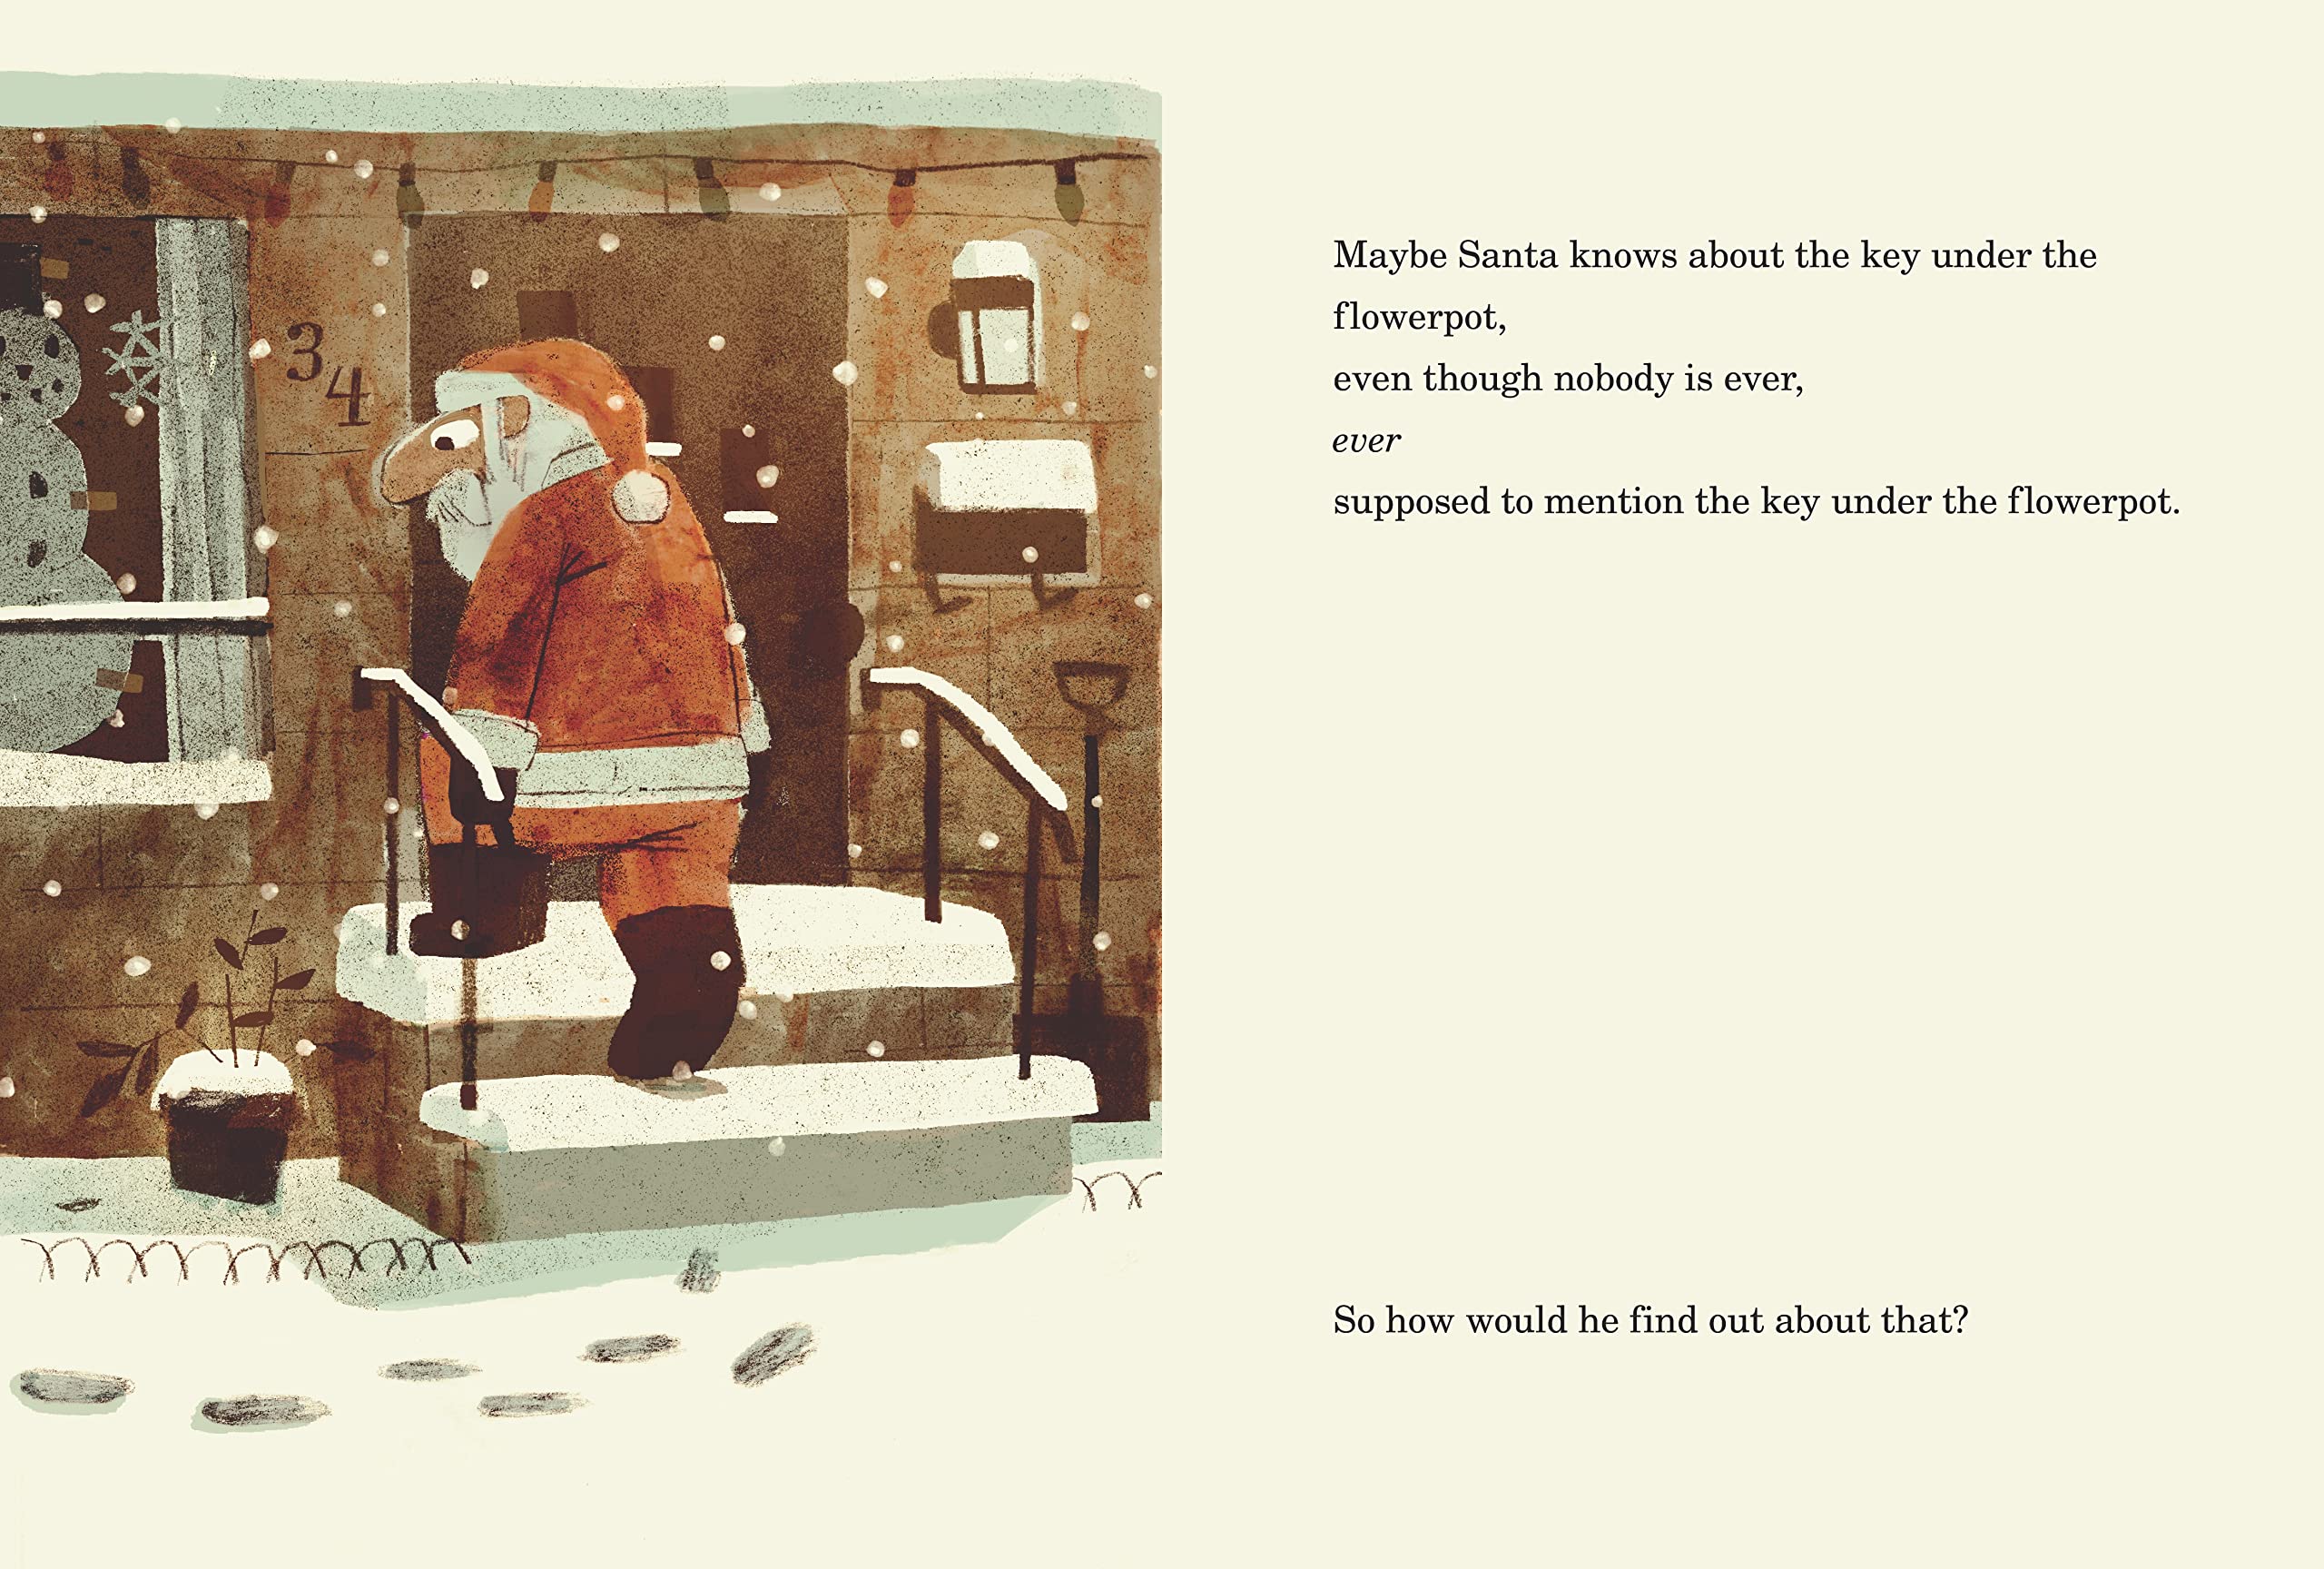 How Does Santa Go Down The Chimney? | Kid's Book